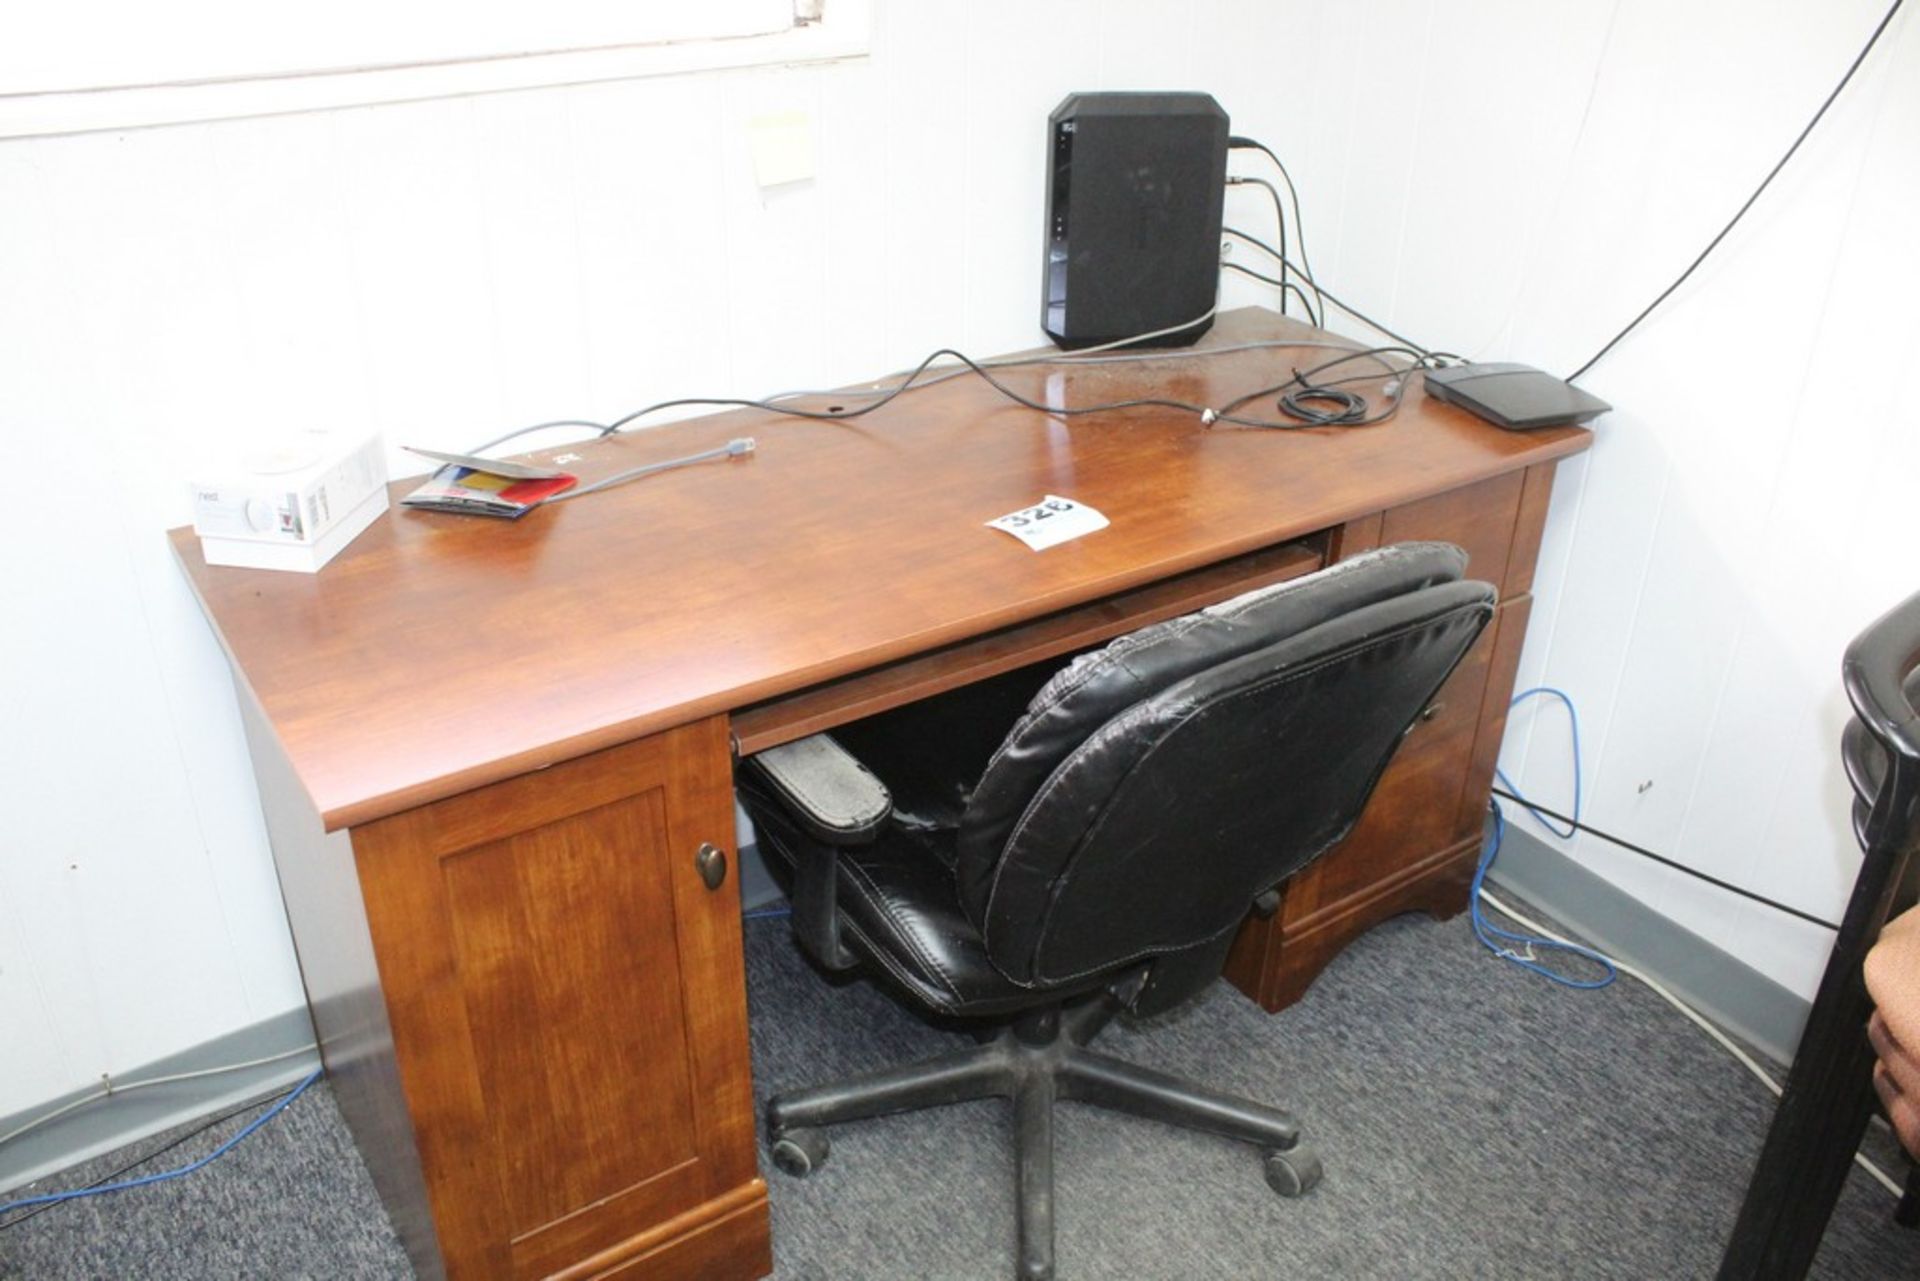 DESK-29" X 59" X 23", WITH CHAIR